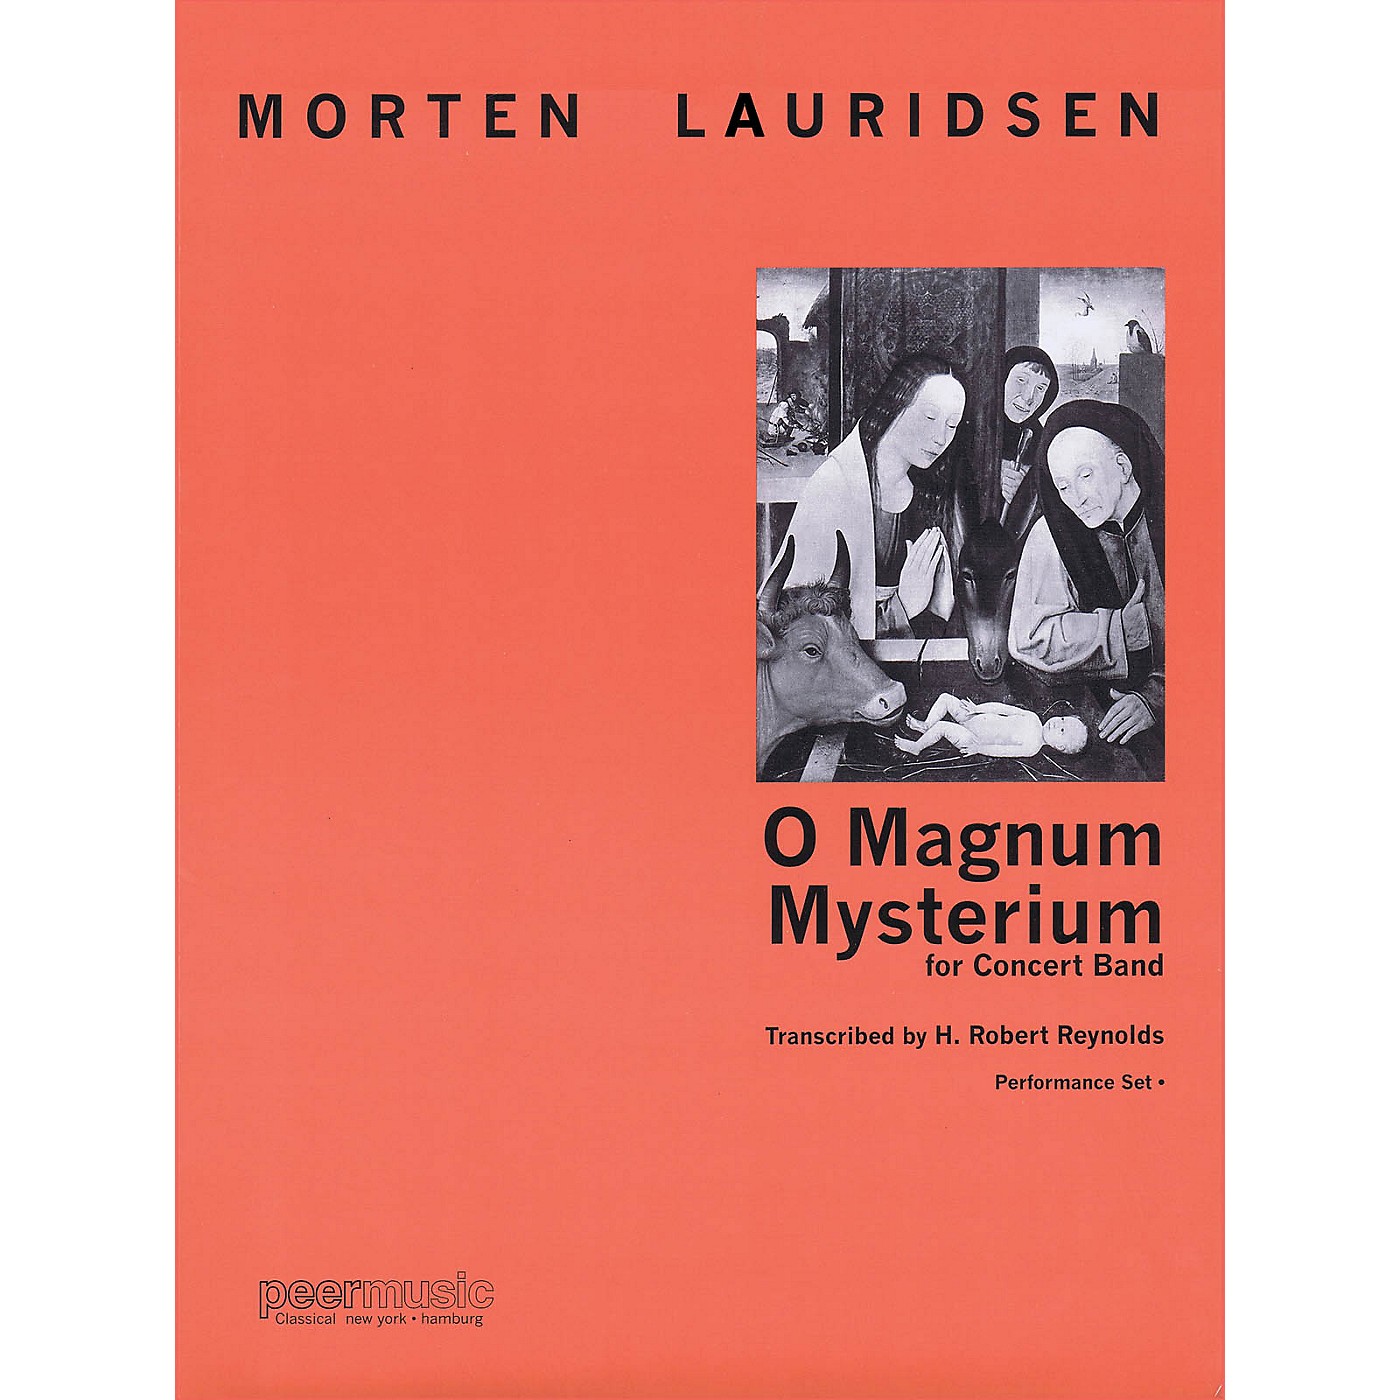 PEER MUSIC O Magnum Mysterium (for Concert Band) Concert Band Level 4 Composed by Morten Lauridsen thumbnail